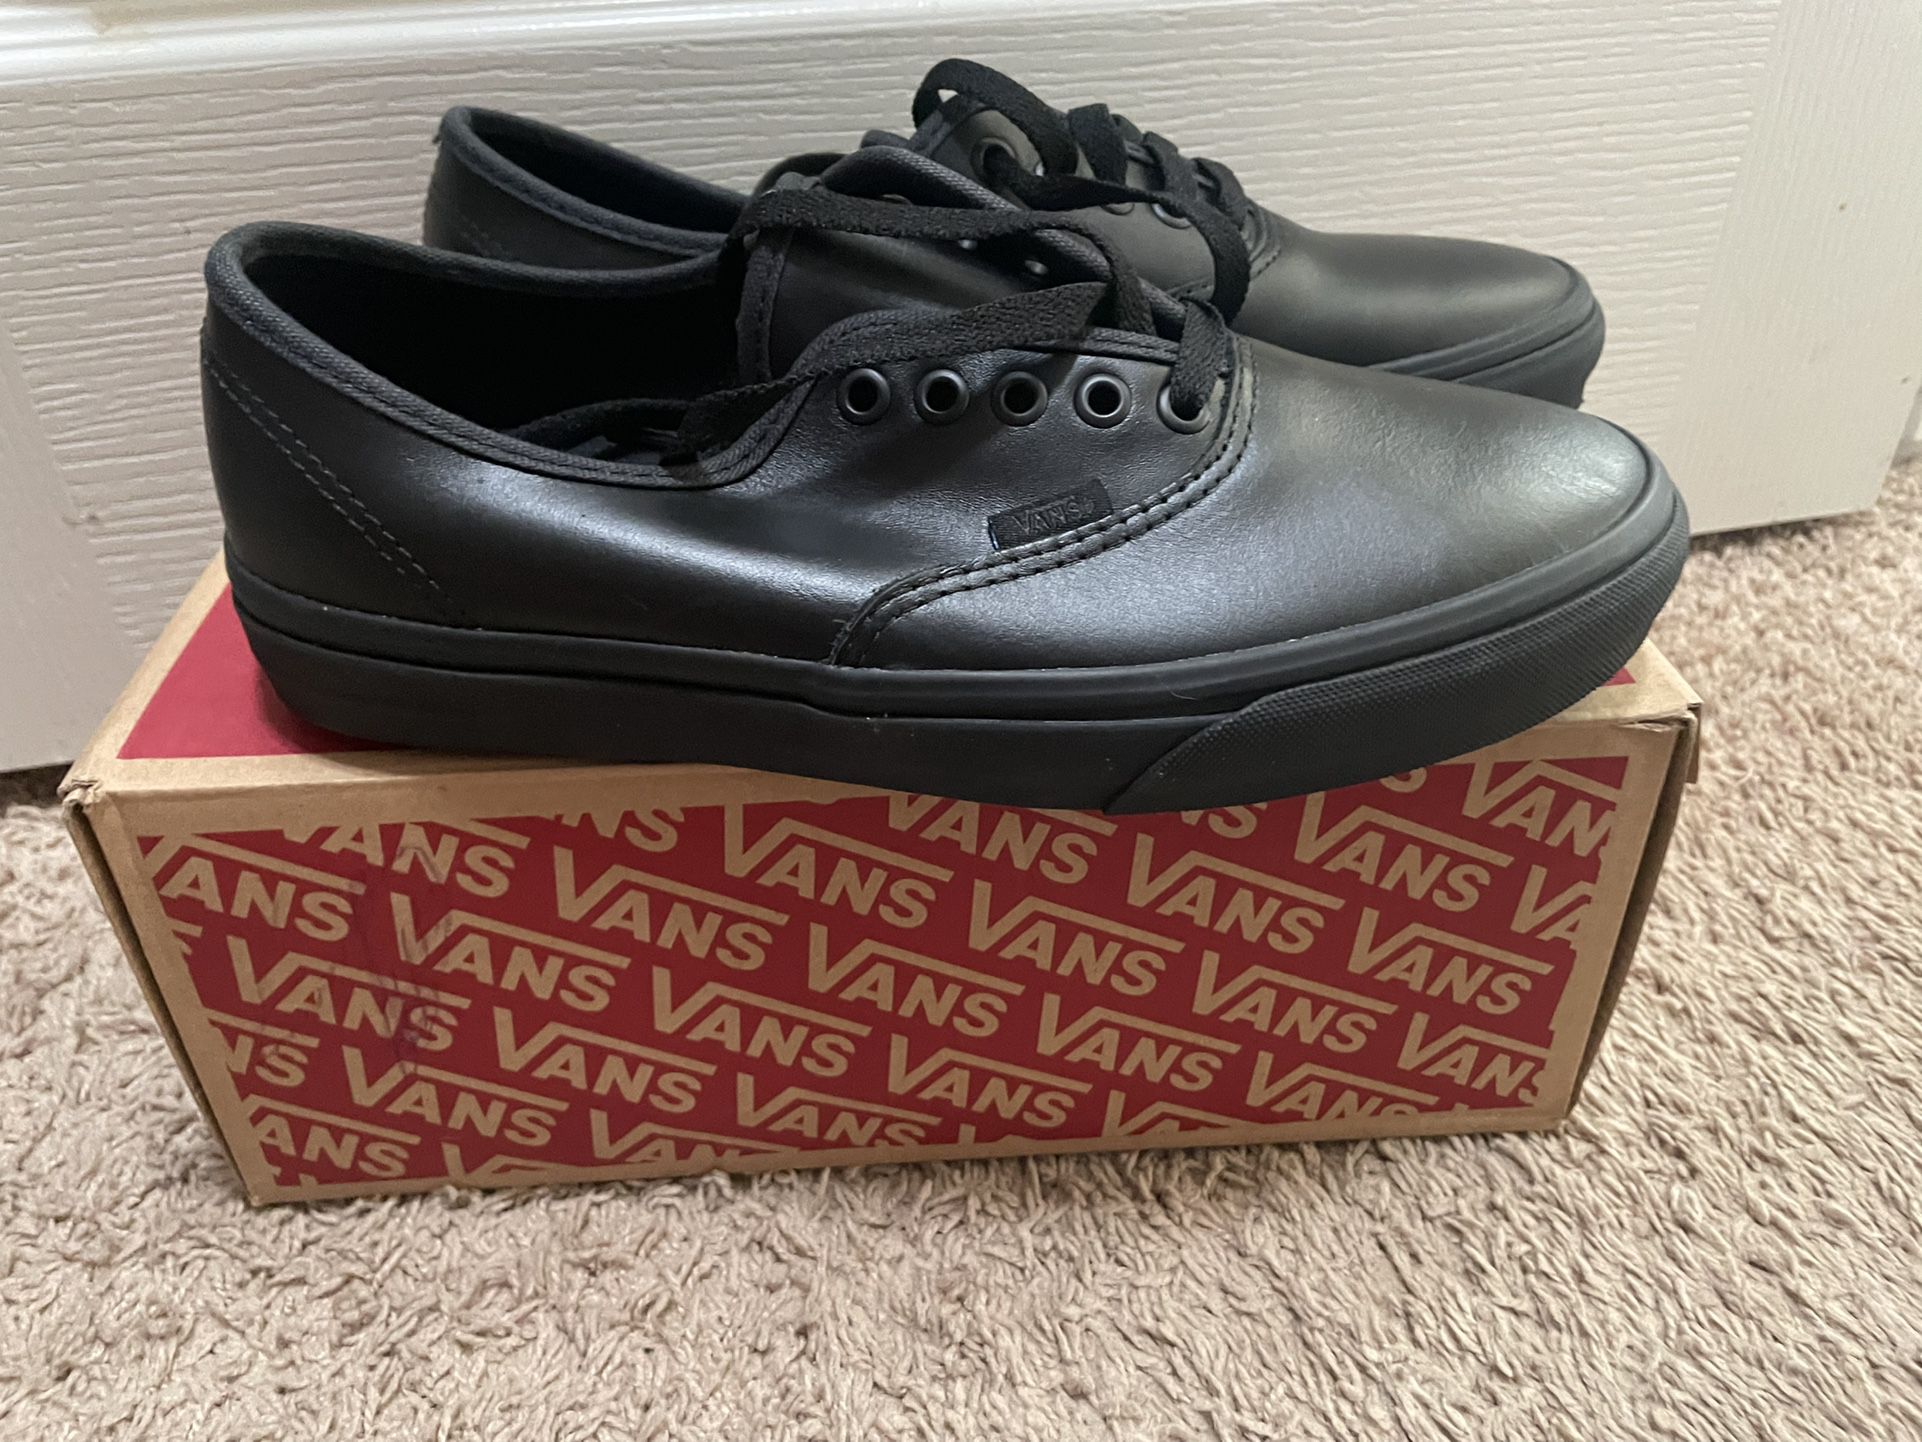 VANS AUTHENTIC Made For The Makers Black Canvas Slip Resistant 